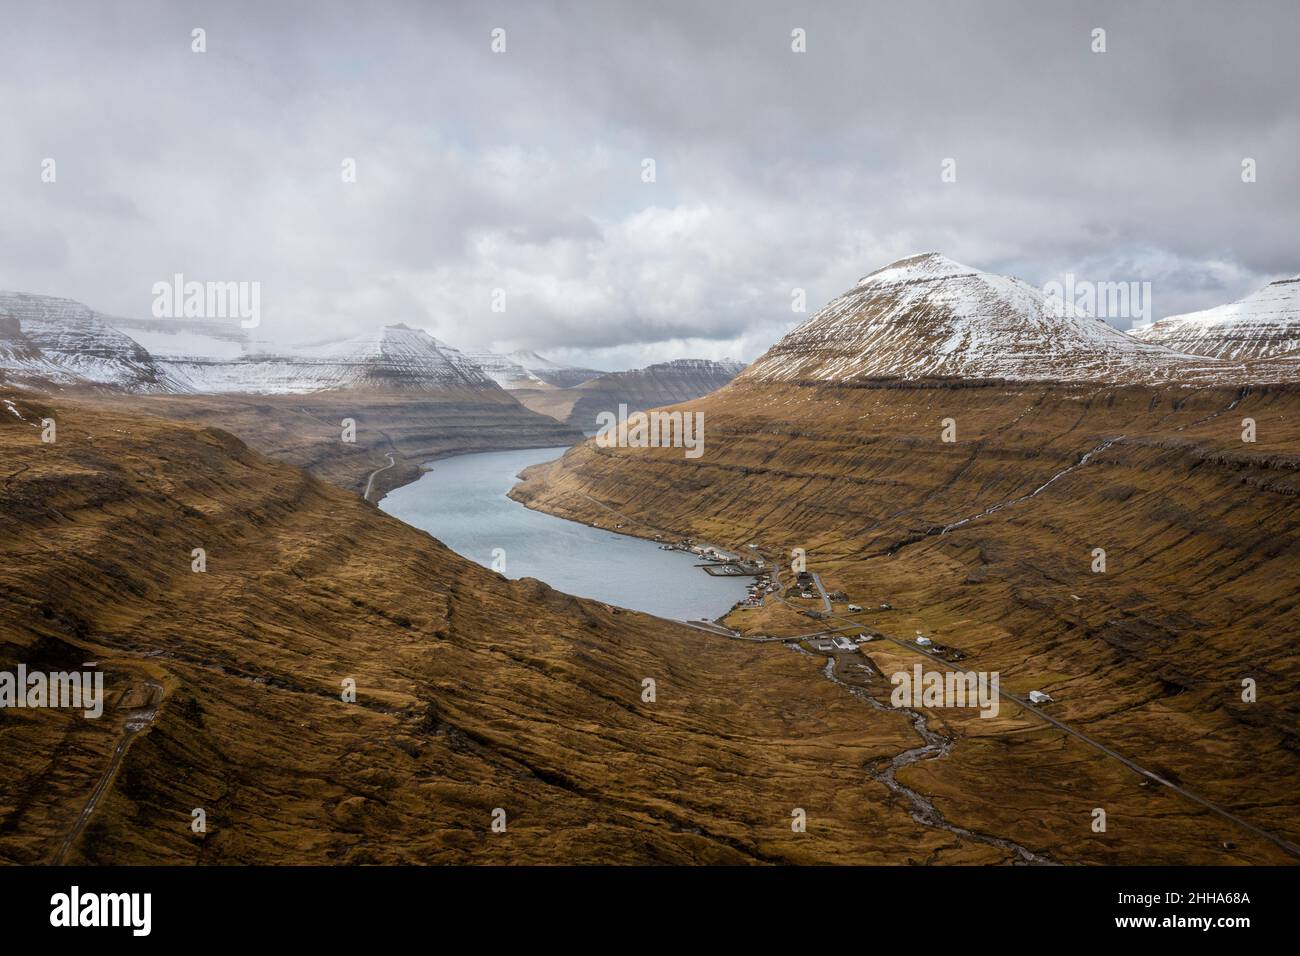 A valley surrounded by snow-capped mountains interlaced with tributaries. Stock Photo